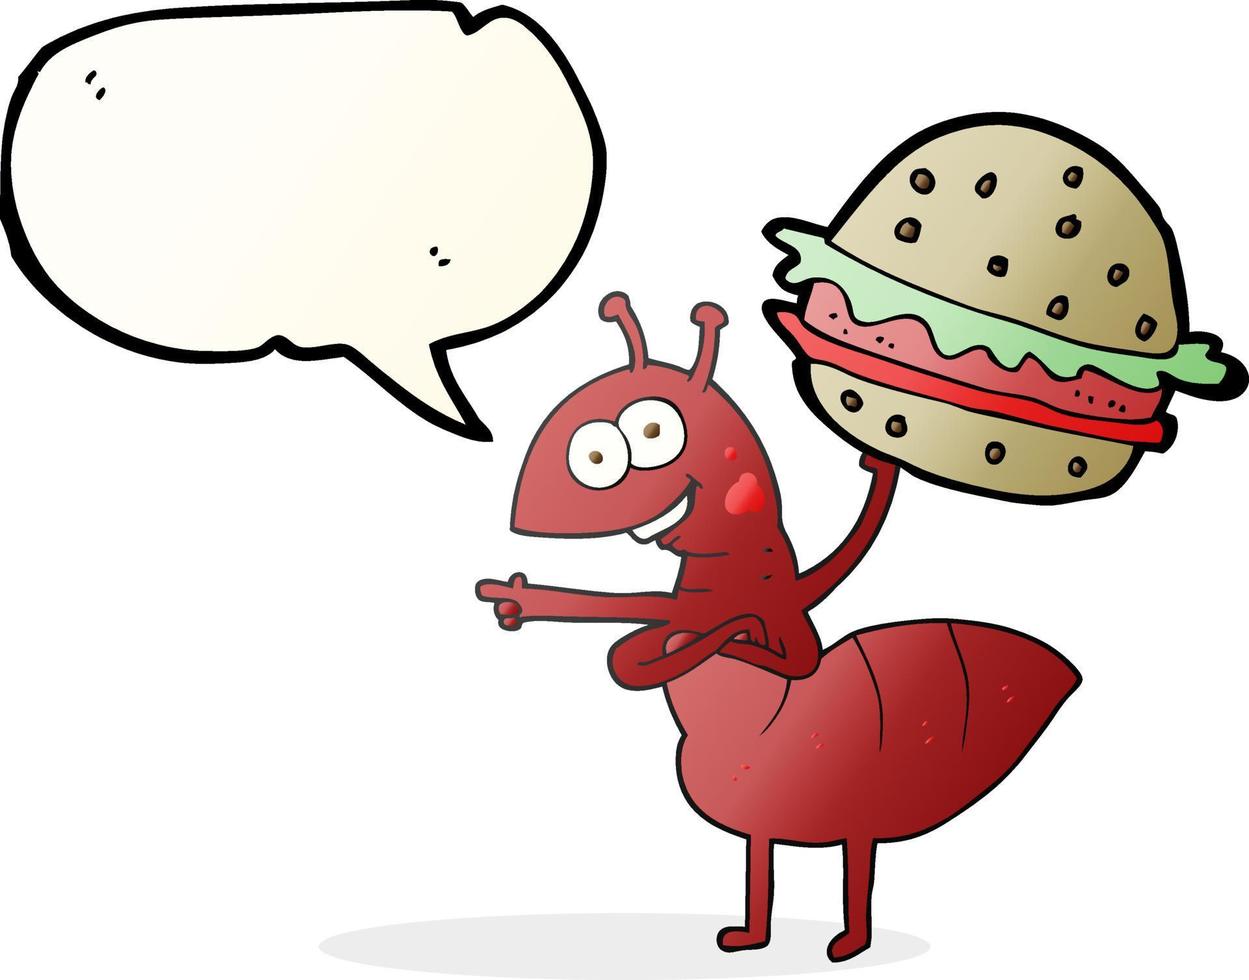 freehand drawn speech bubble cartoon ant carrying food vector